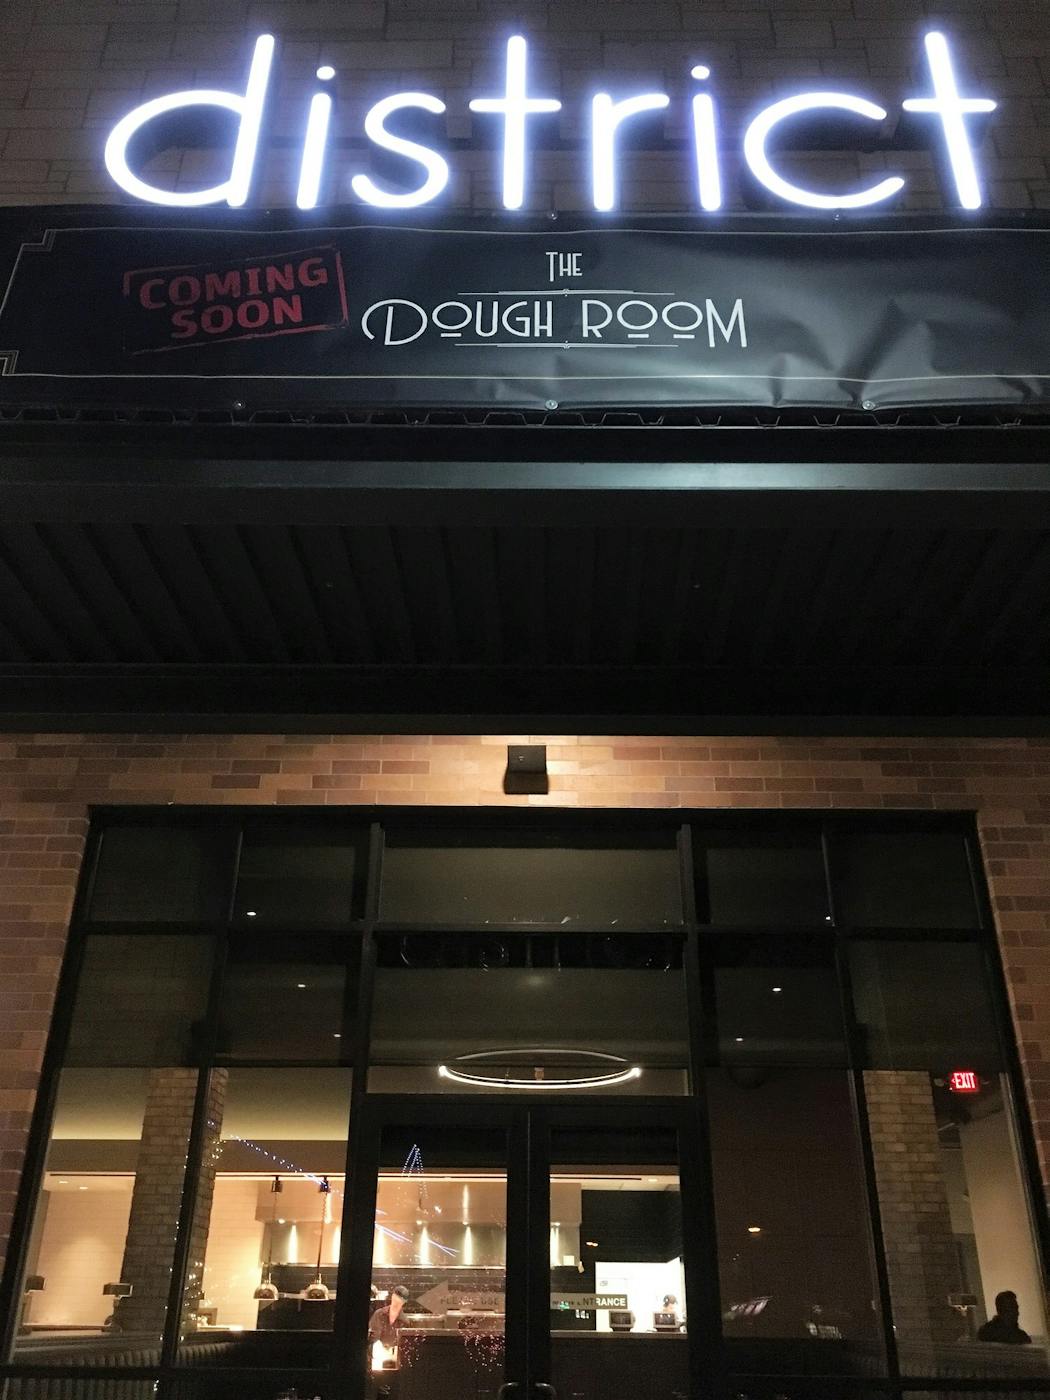 The Dough Room takes over the former District in Wayzata.